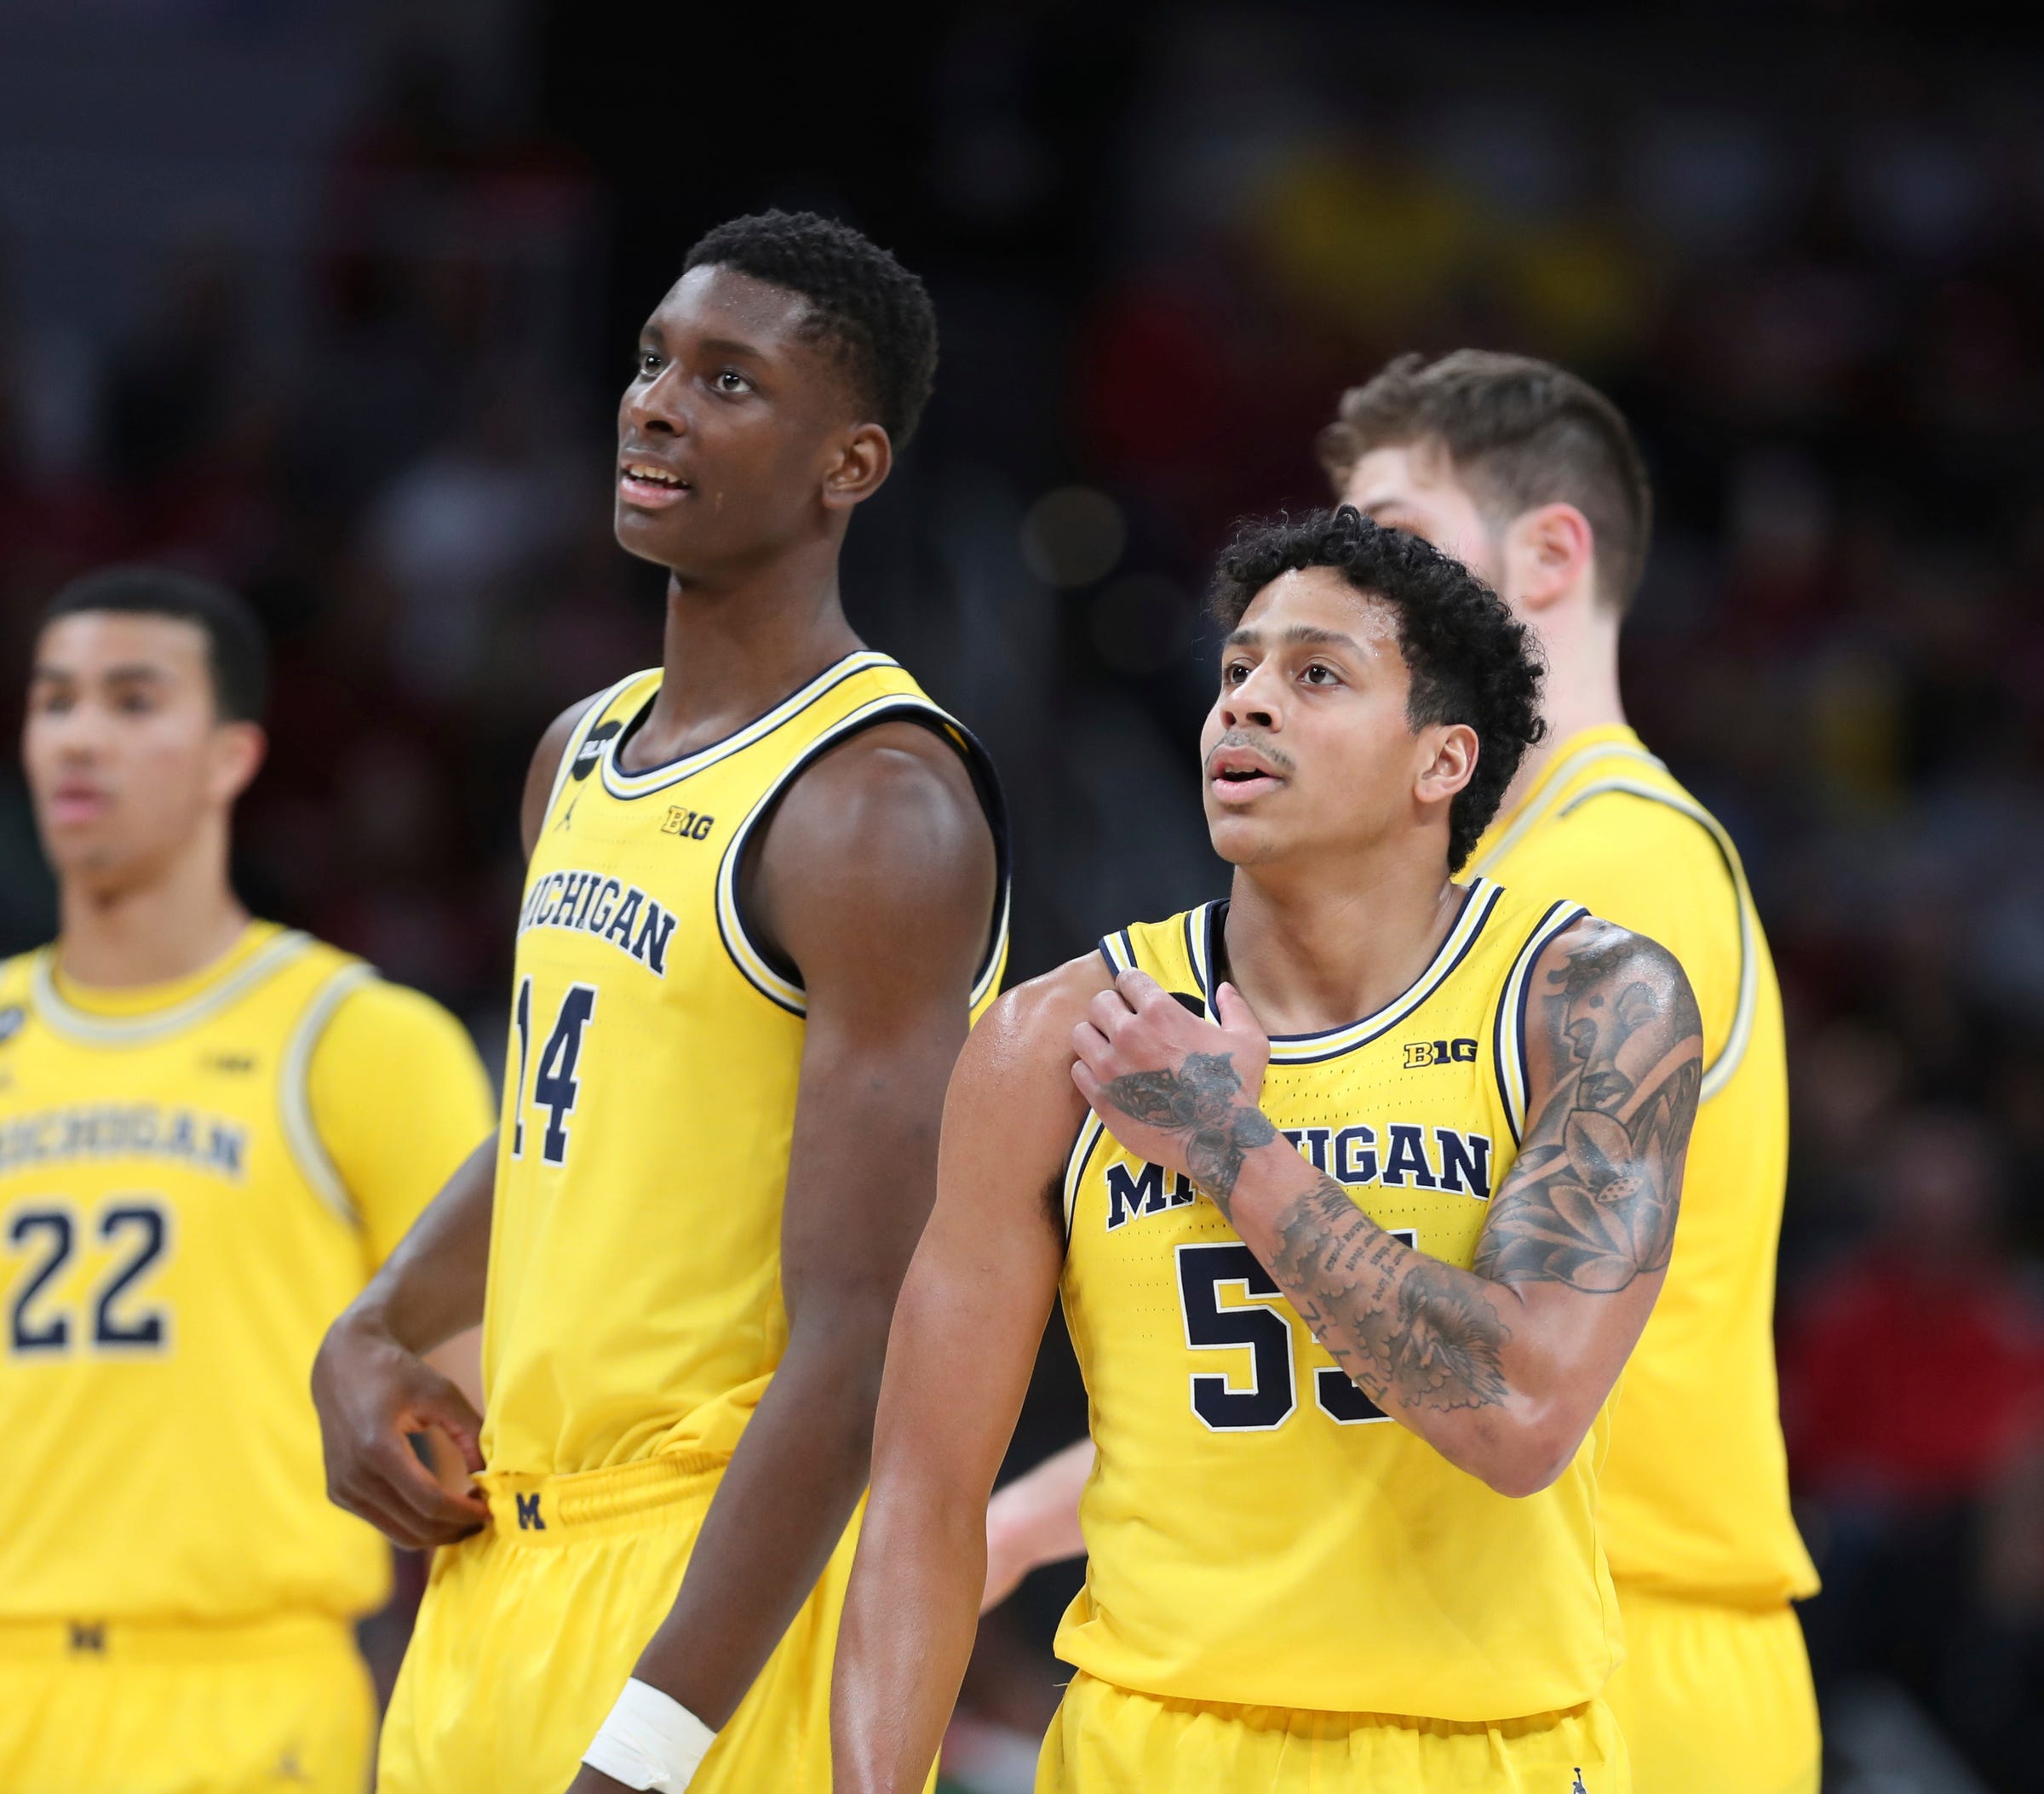 Michigan odds to win national championship basketball ethereal network analyzer manual